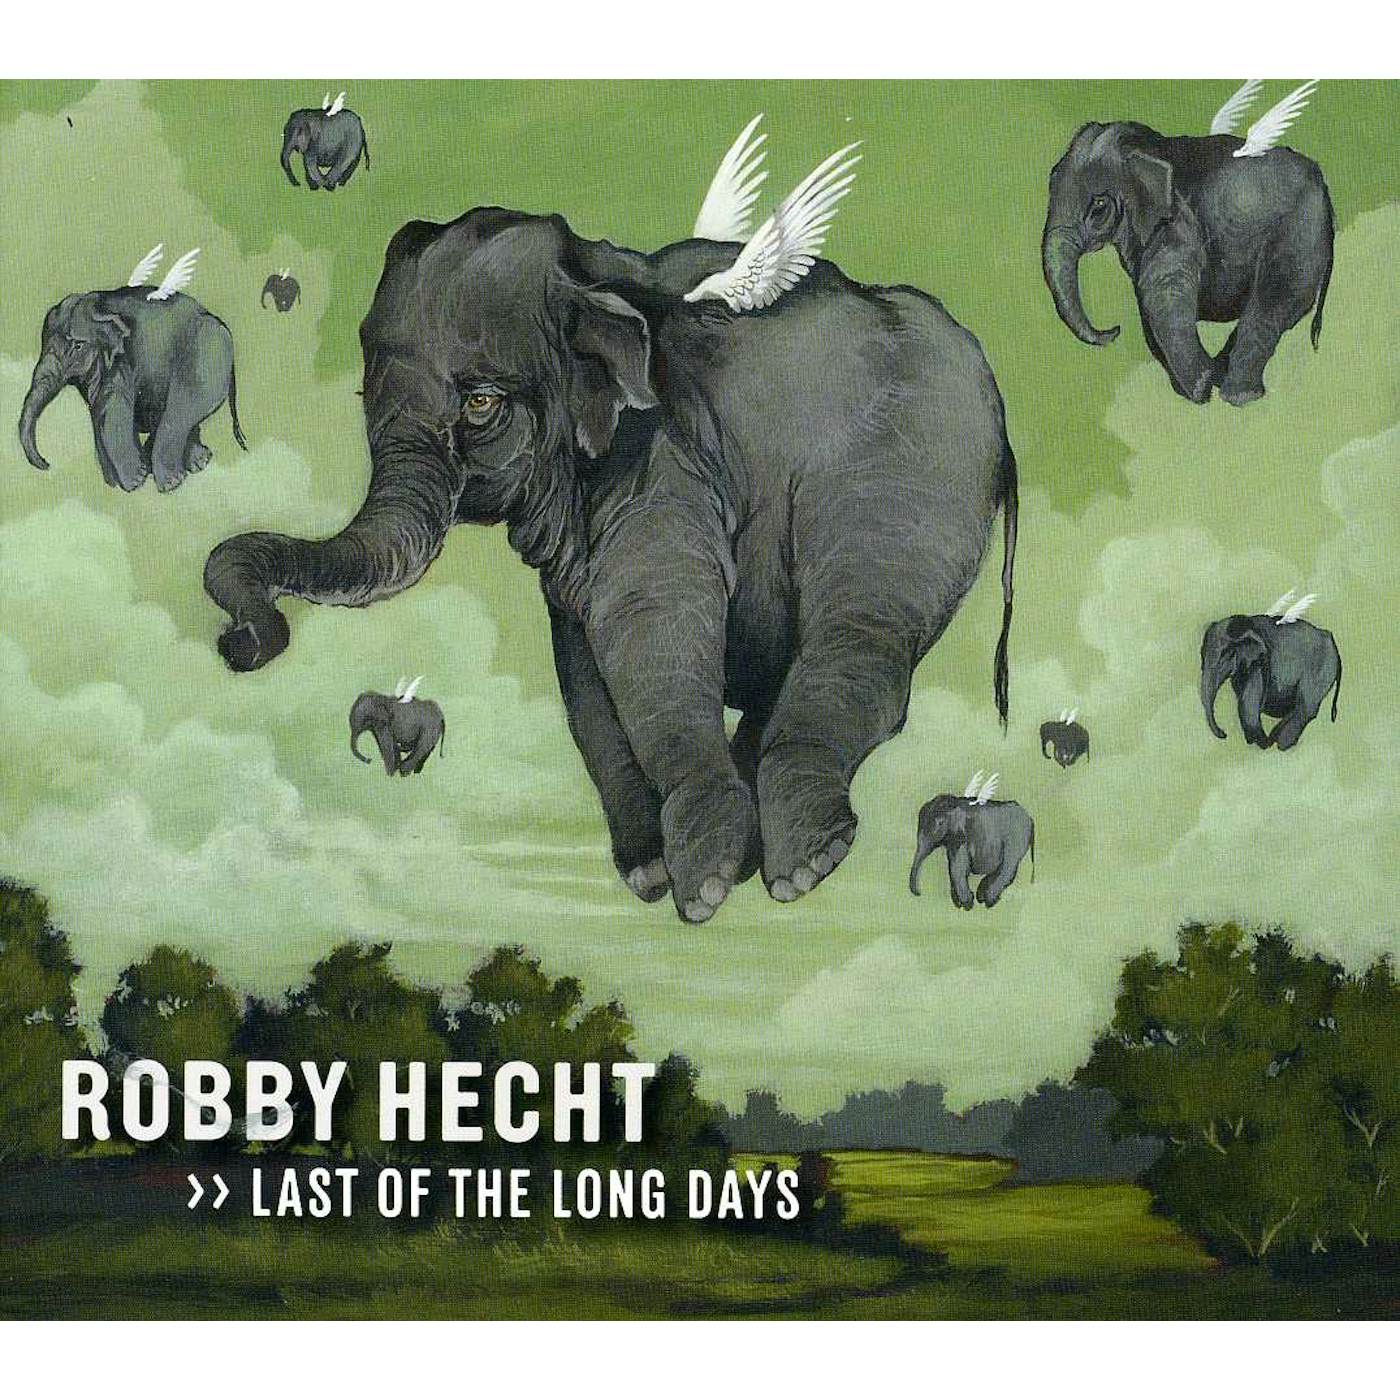 Robby Hecht LAST OF THE LONG DAYS CD